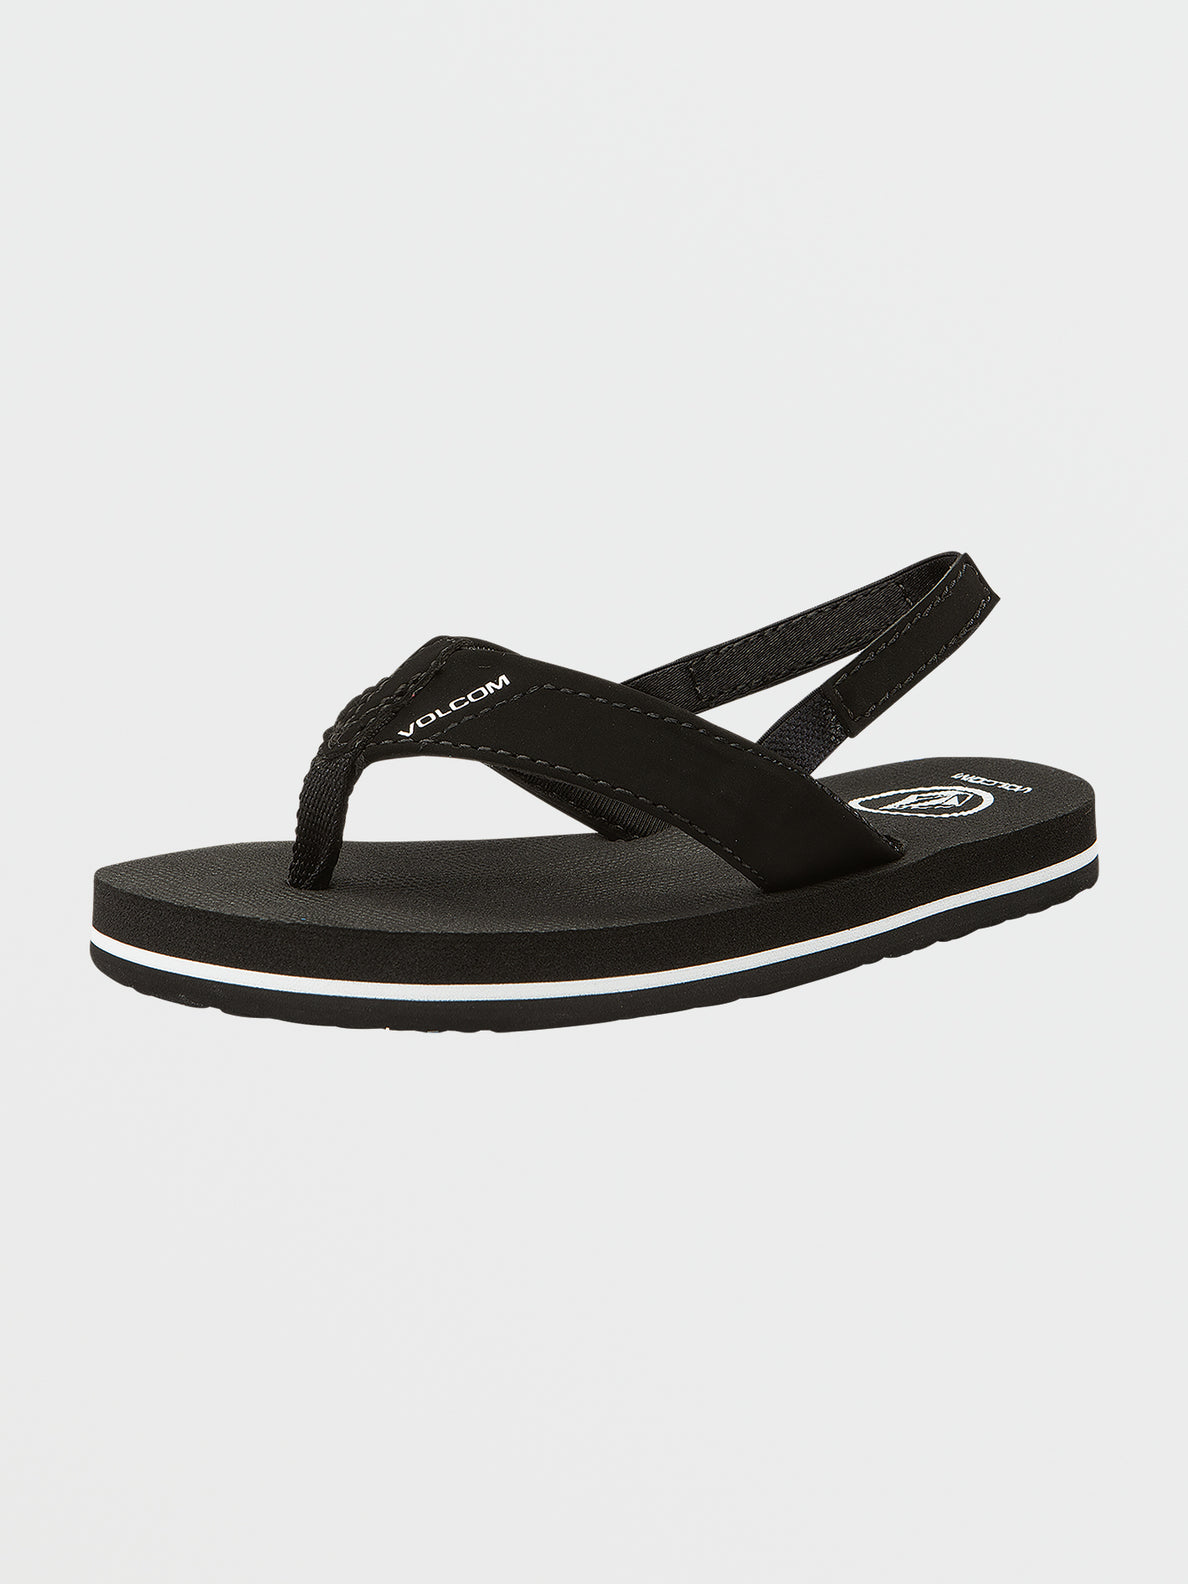 Victor Little Youth Sandals - Black